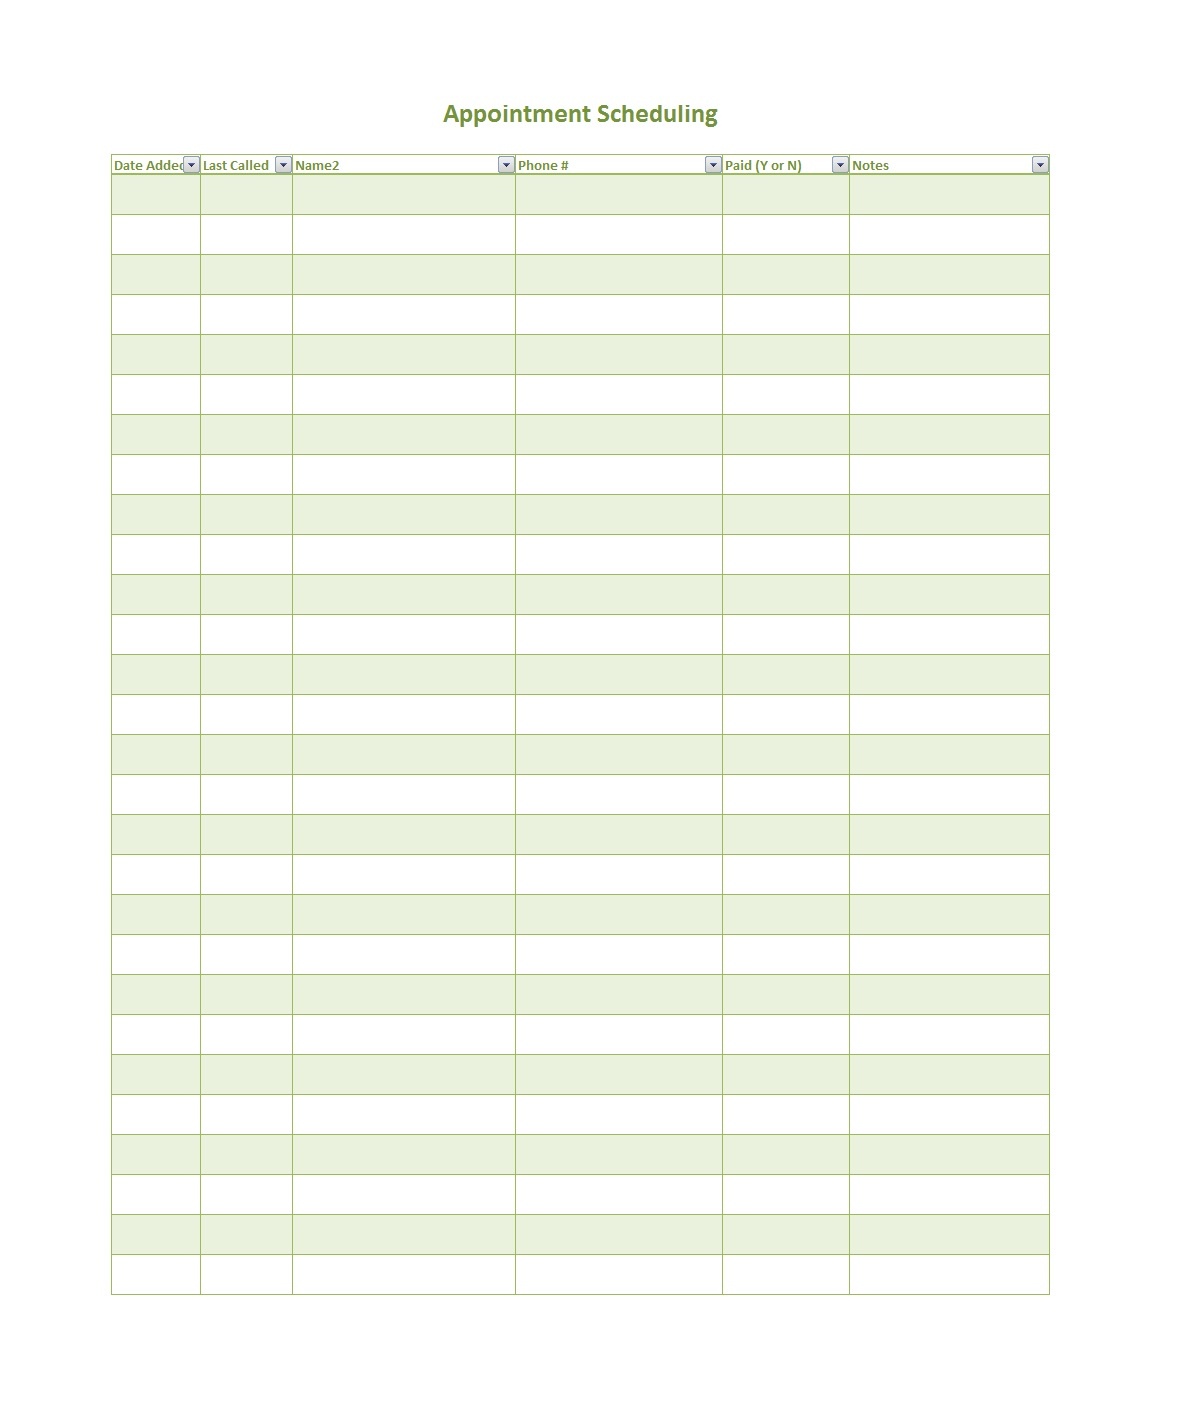 45 Printable Appointment Schedule Templates [&amp;amp; Appointment Calendars] - Free Printable Appointment Sheets